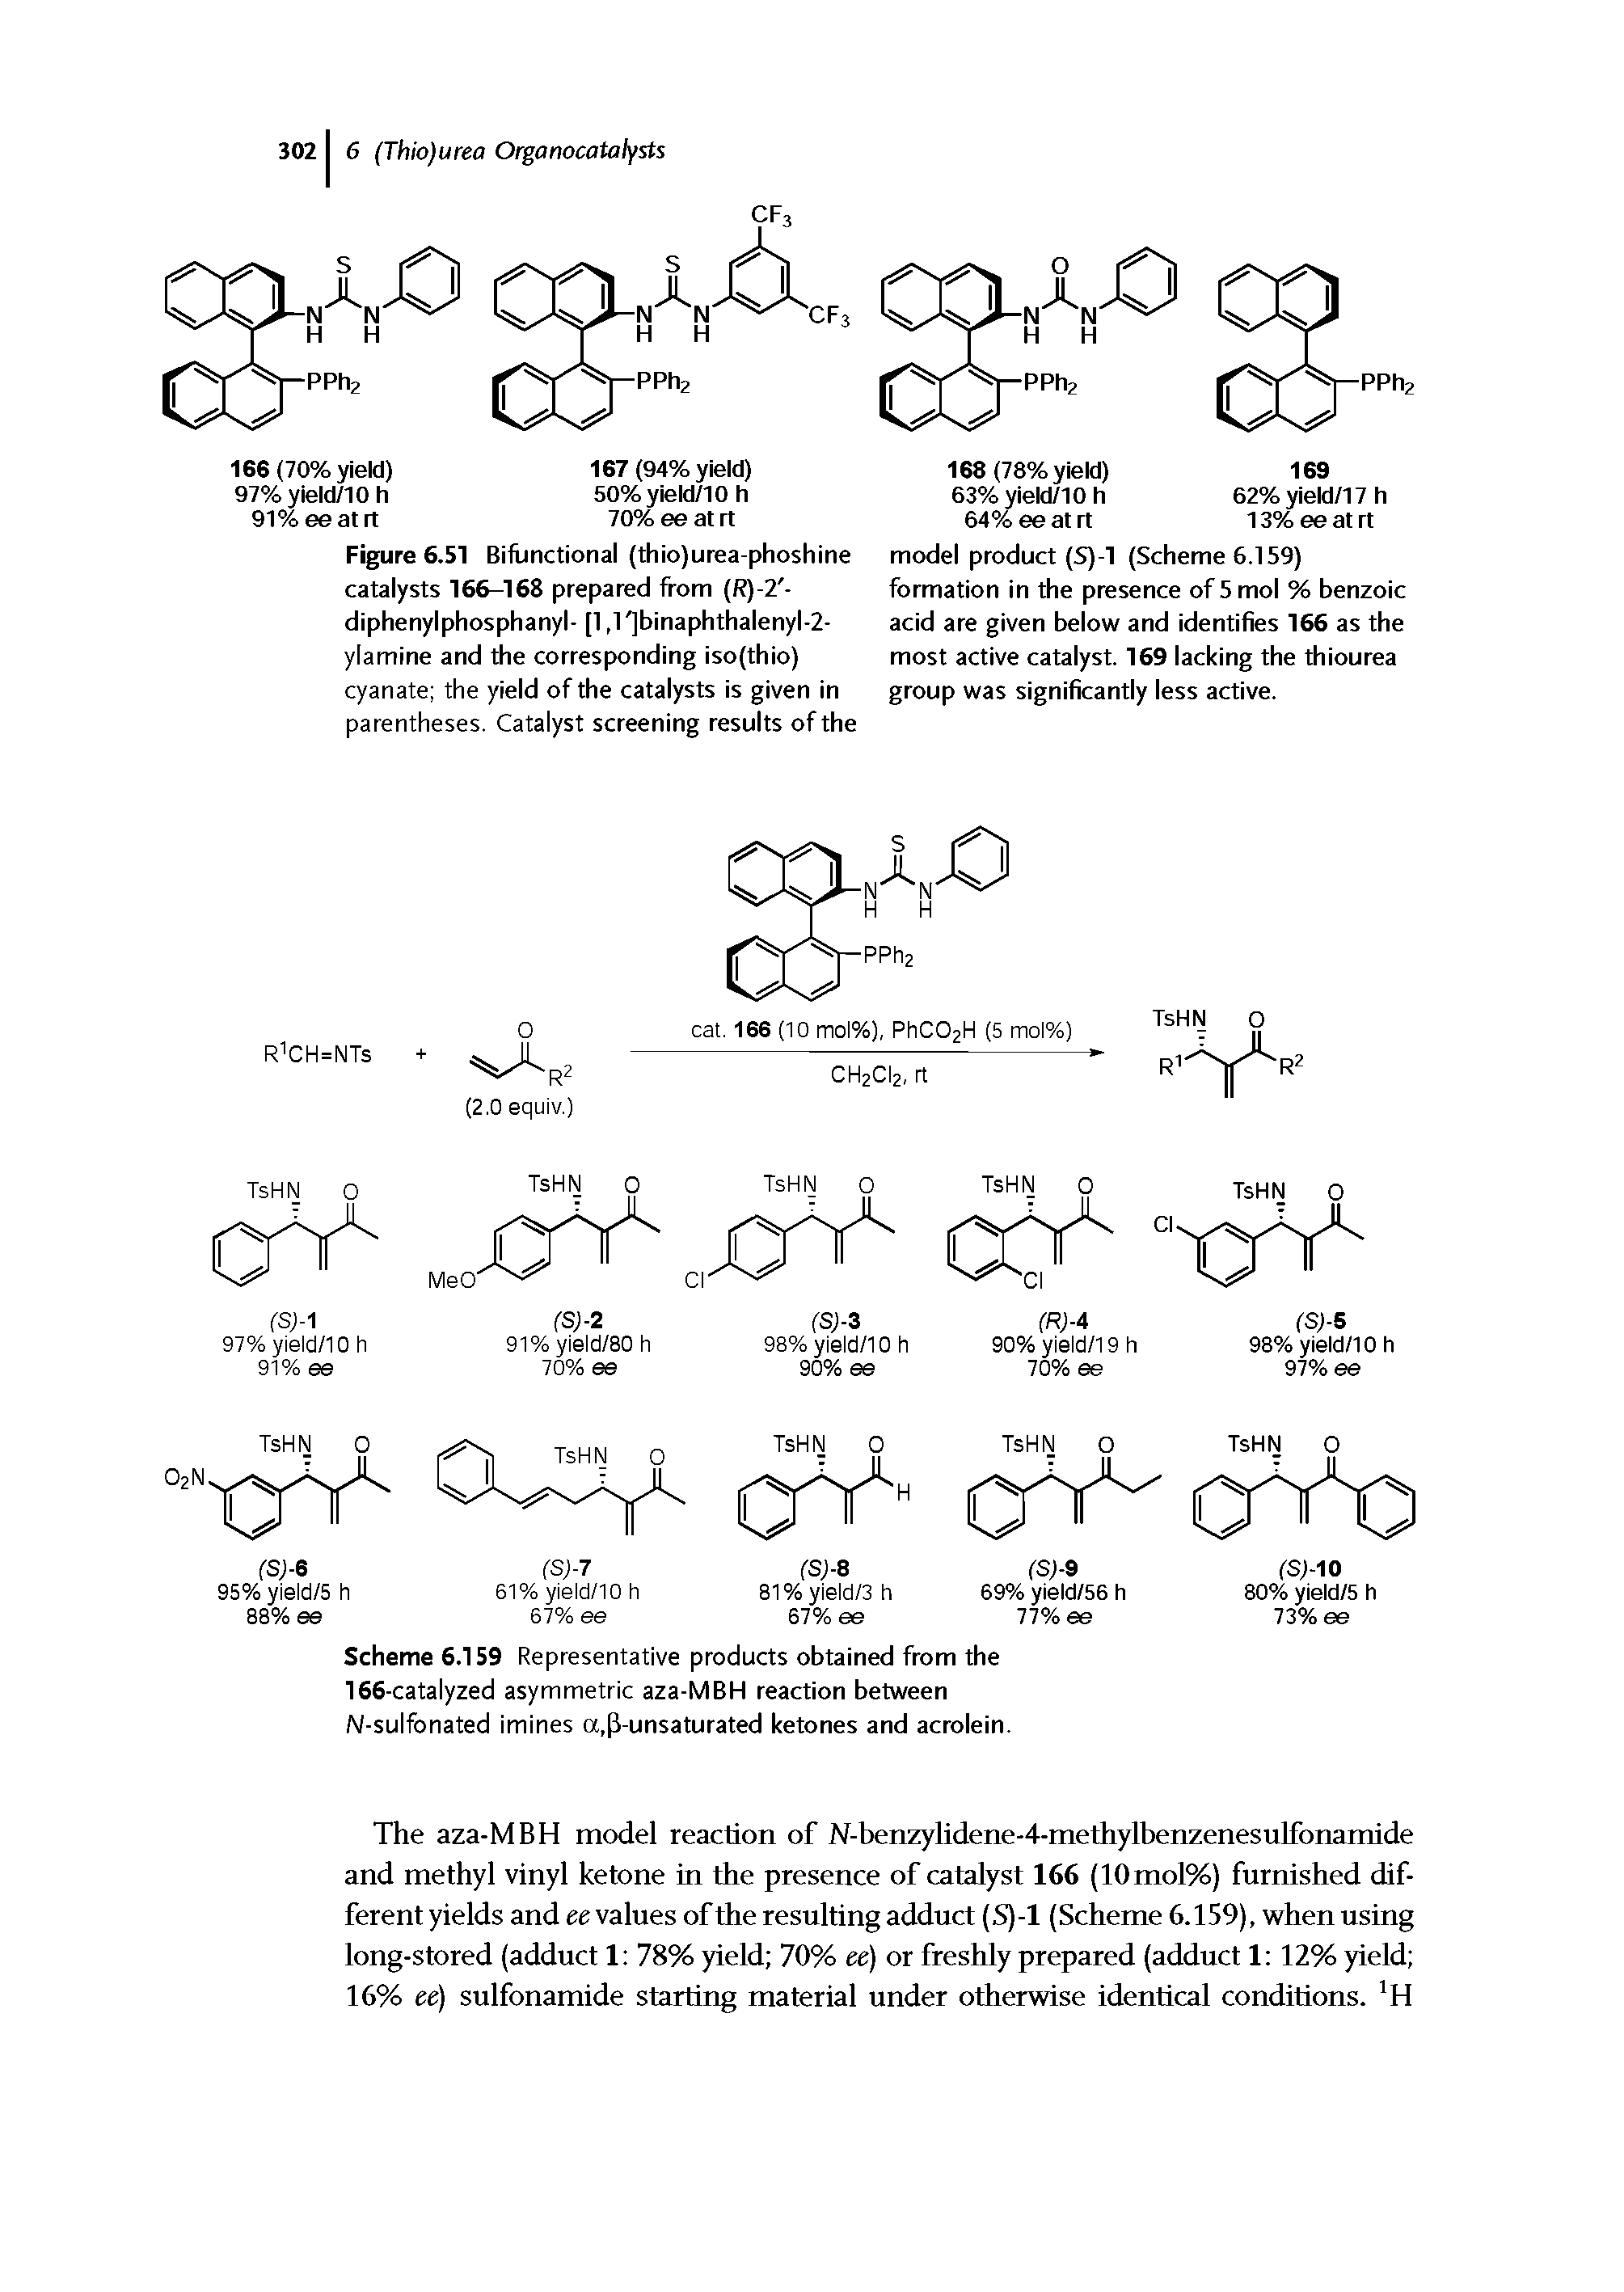 Figure 6.51 Biflinctional (thio)urea-phoshine catalysts 166-168 prepared from (R)-2 -diphenylphosphanyl- [1,1 ]binaphthalenyl-2-ylamine and the corresponding iso(thio) cyanate the yield of the catalysts is given in parentheses. Catalyst screening results ofthe...